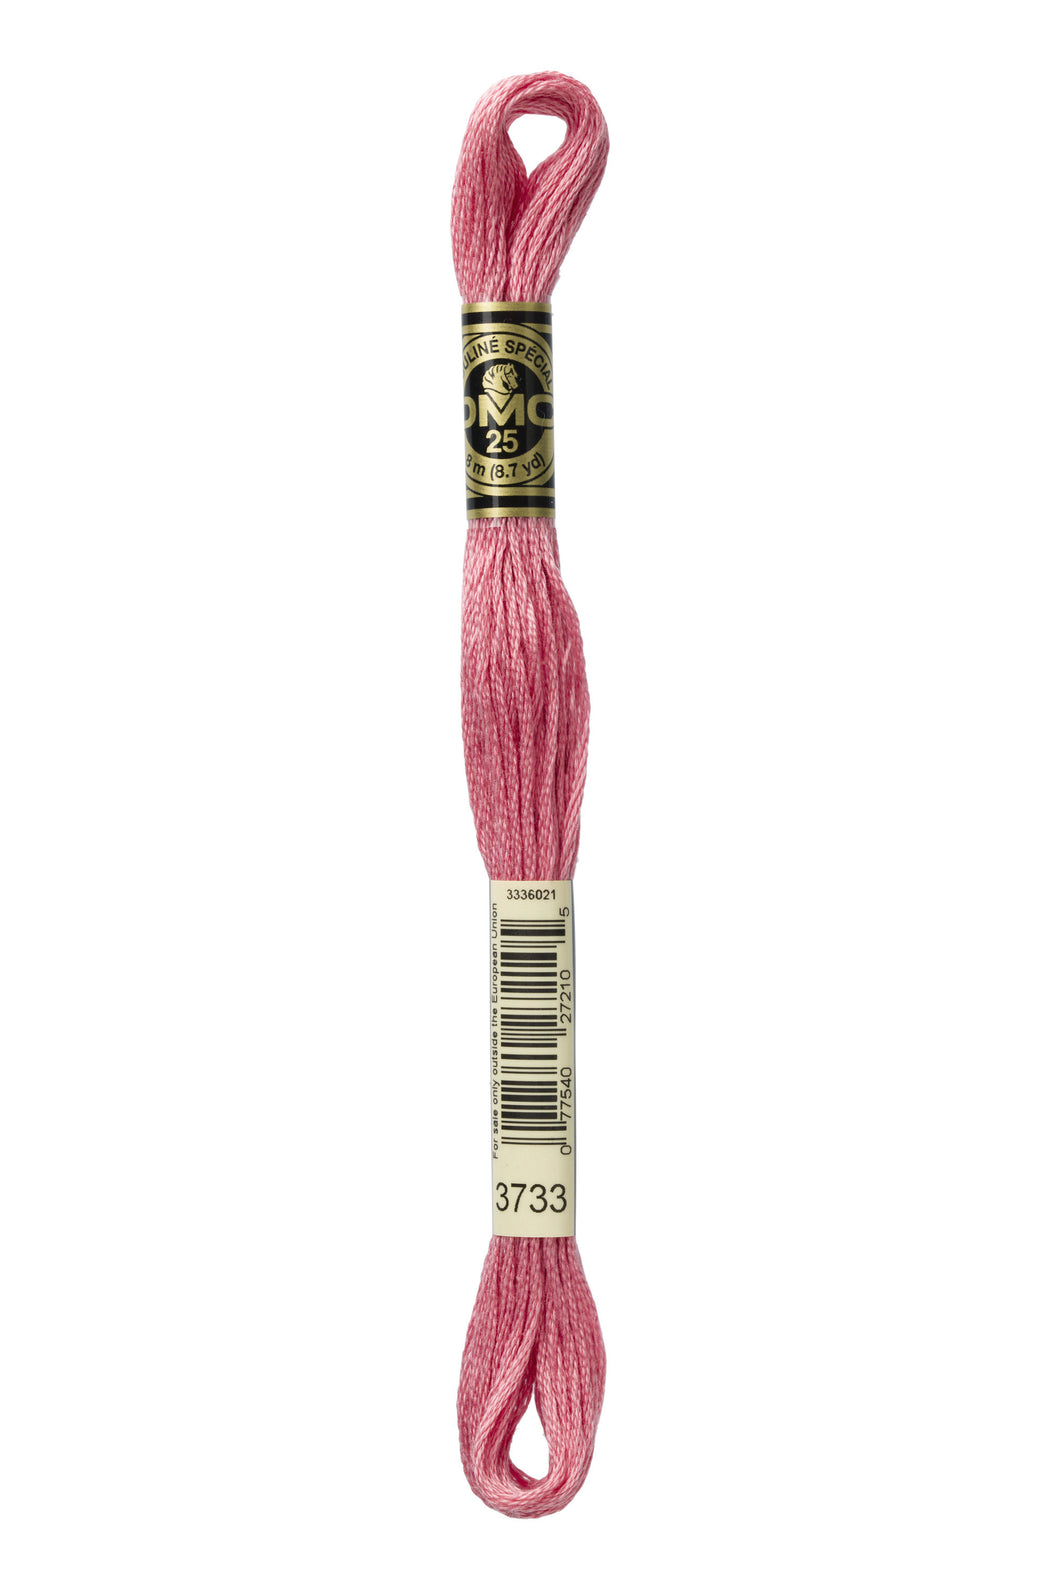 DMC 3733 Dusty Rose 6-Strand Embroidery Floss